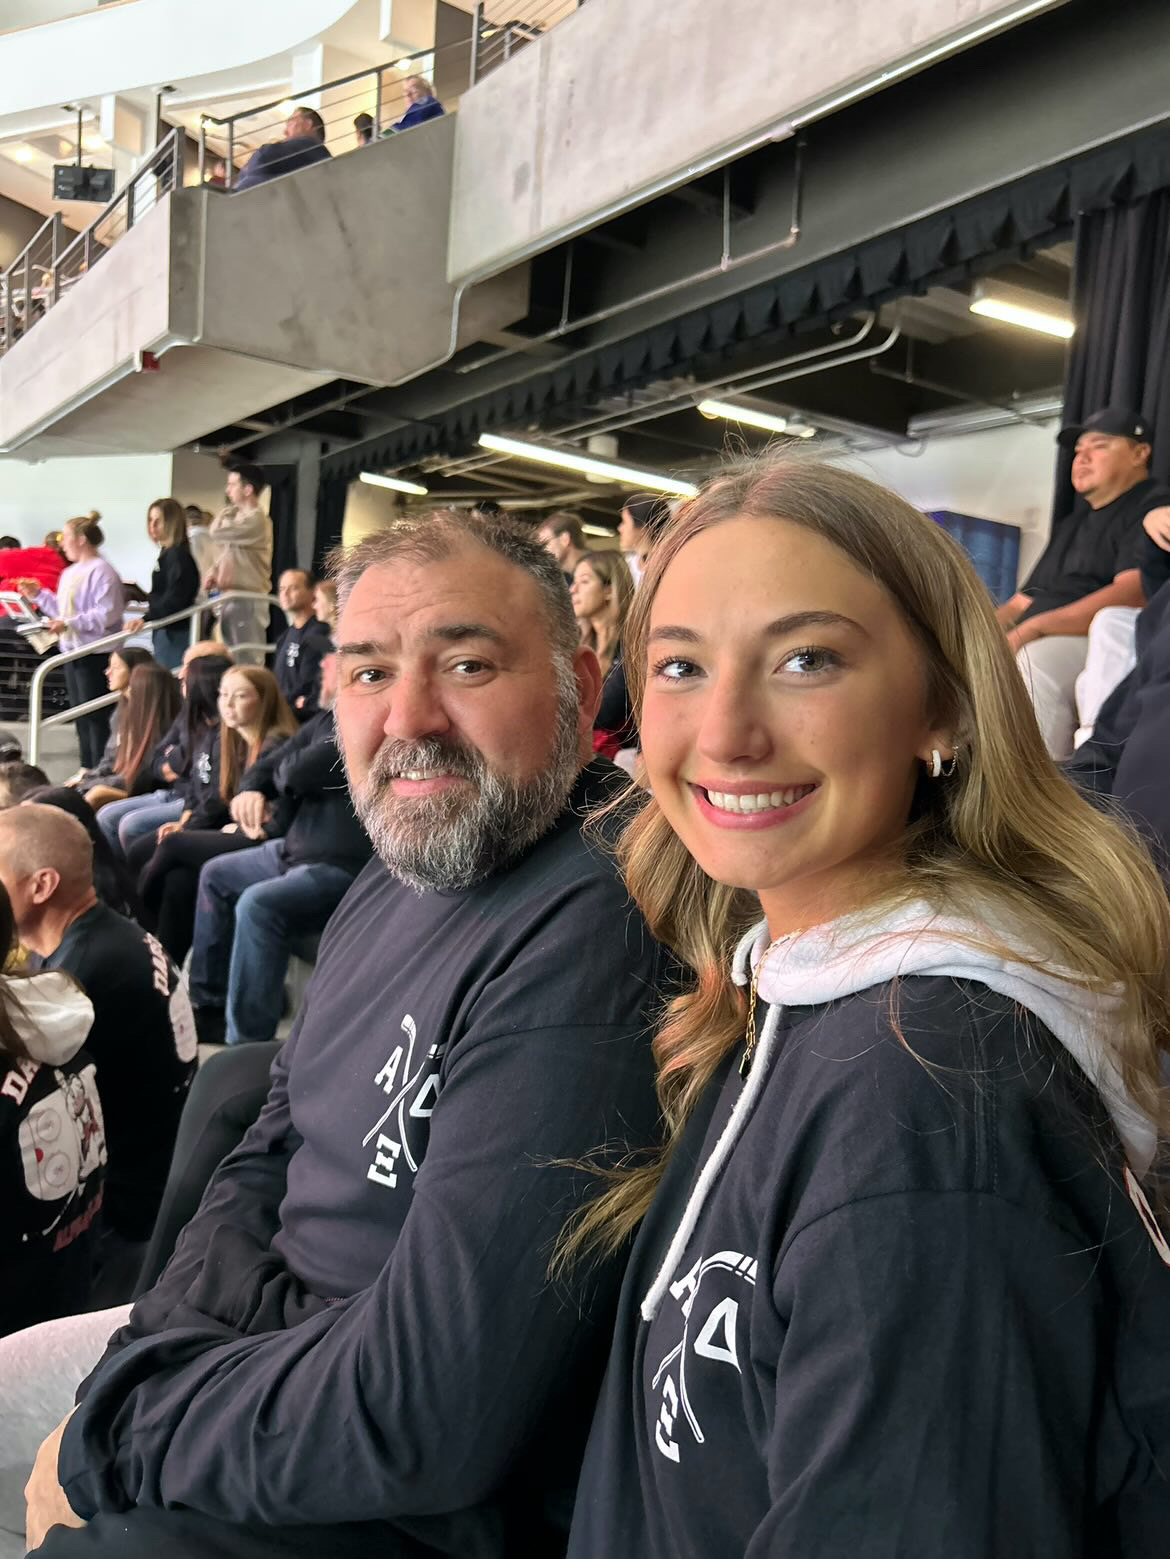 2022 alum Addy Gardner and her dad attend the Alpha Xi Delta sorority event and watch the hockey game. Photo provided by Addy Gardner.